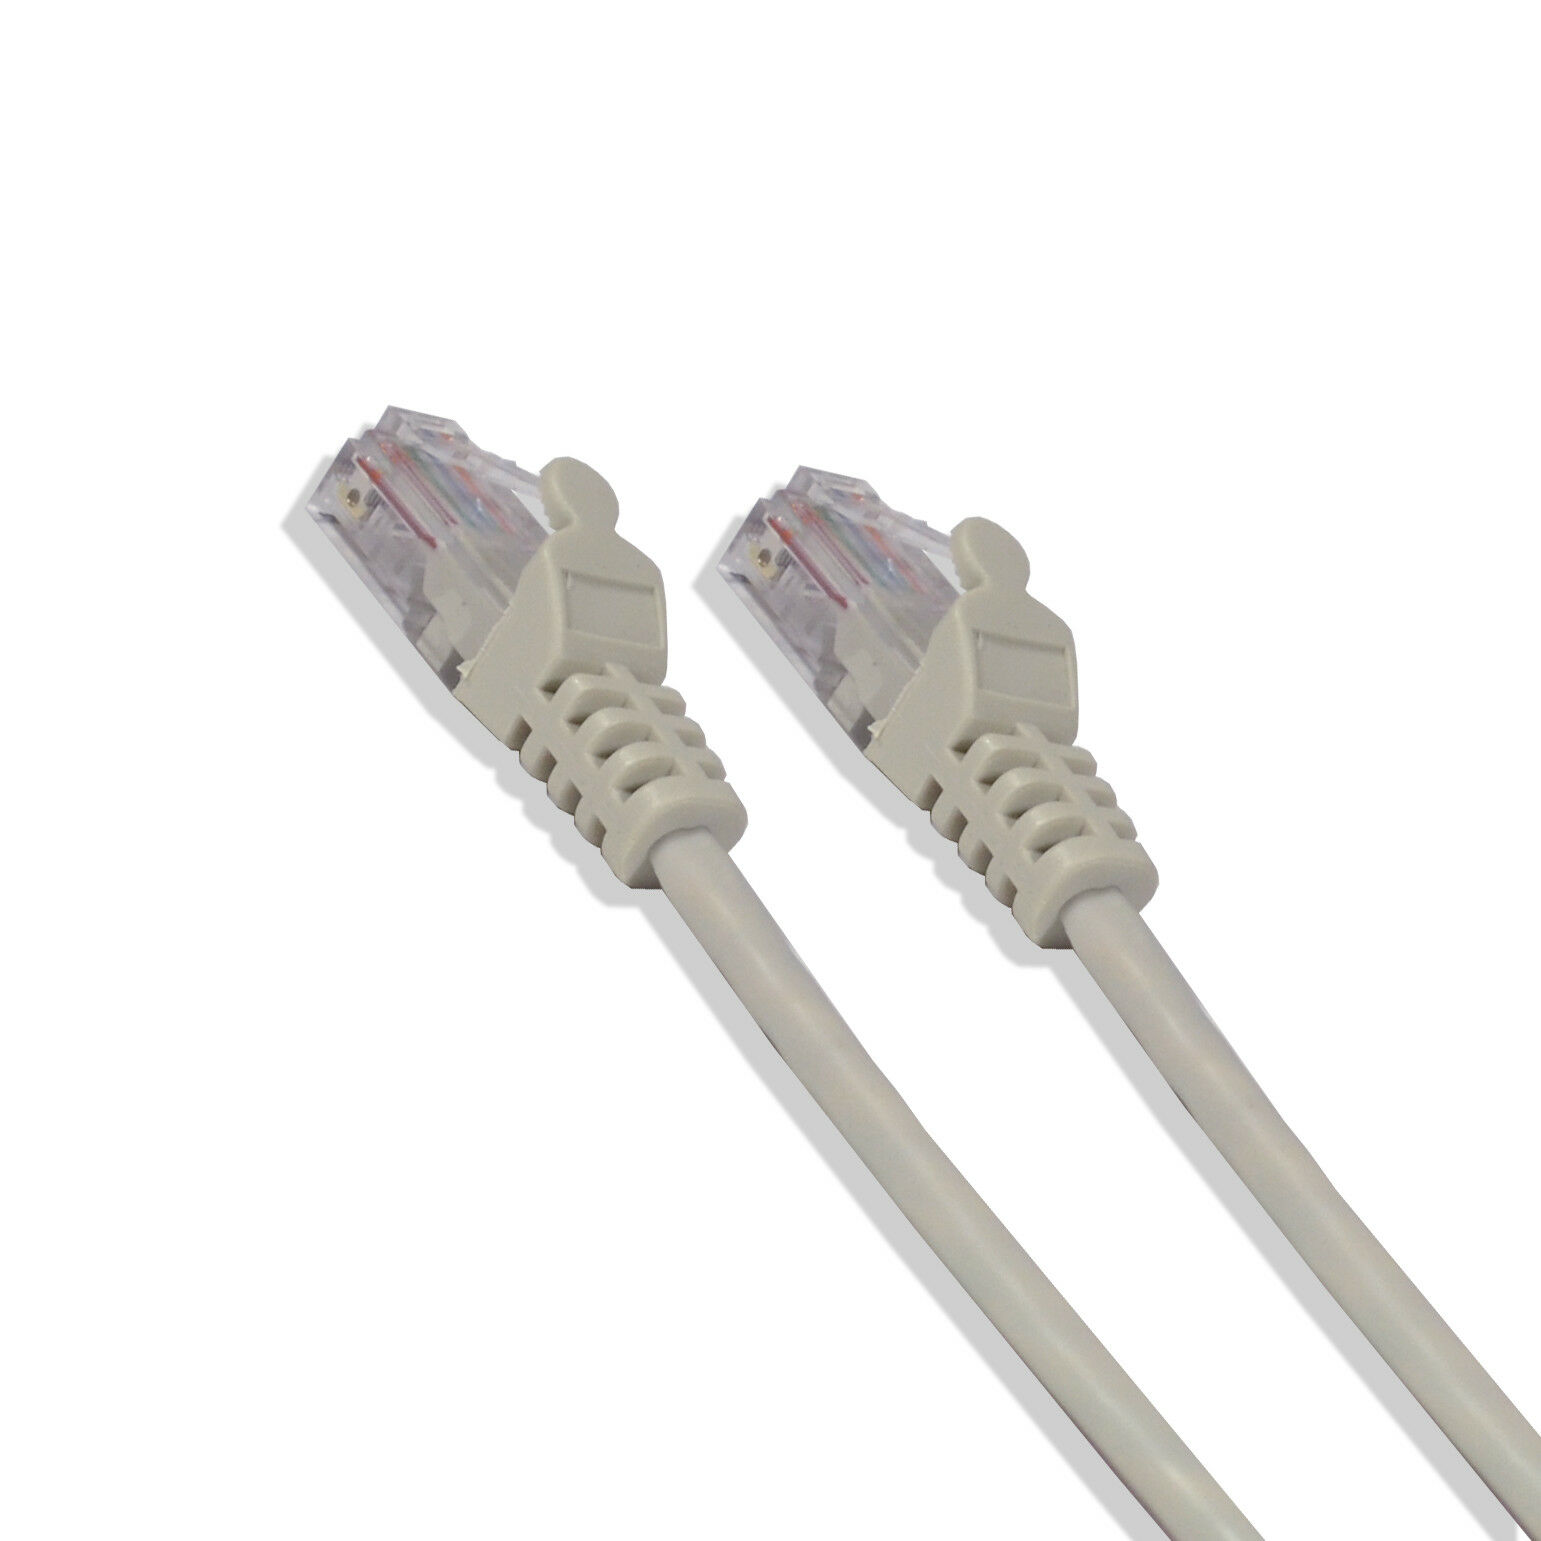 10 Pack 5ft CAT 5e Ethernet Patch Cables w/ Gold Plated Connectors